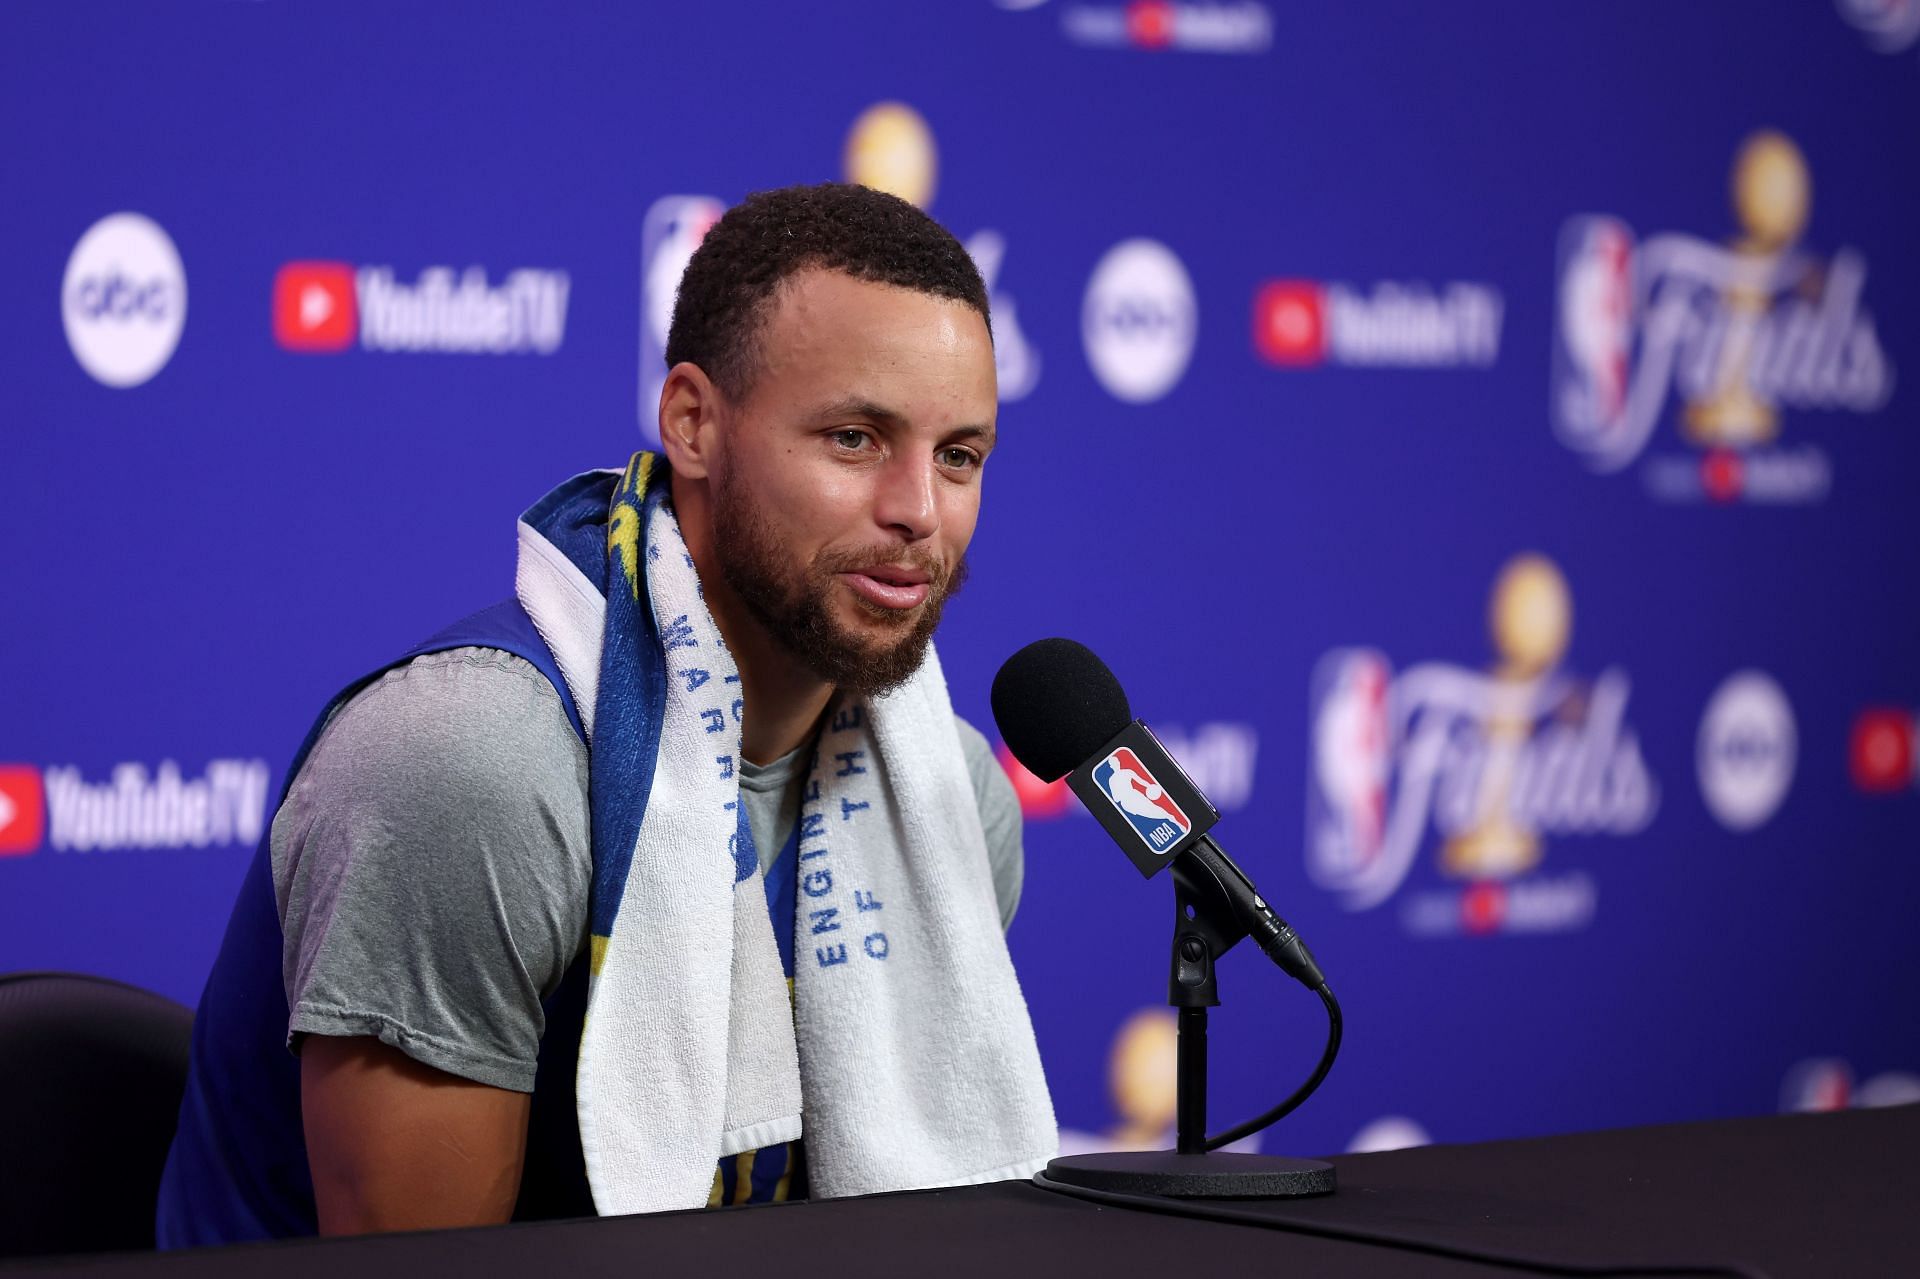 Steph Curry during 2022 NBA Finals - Media Day